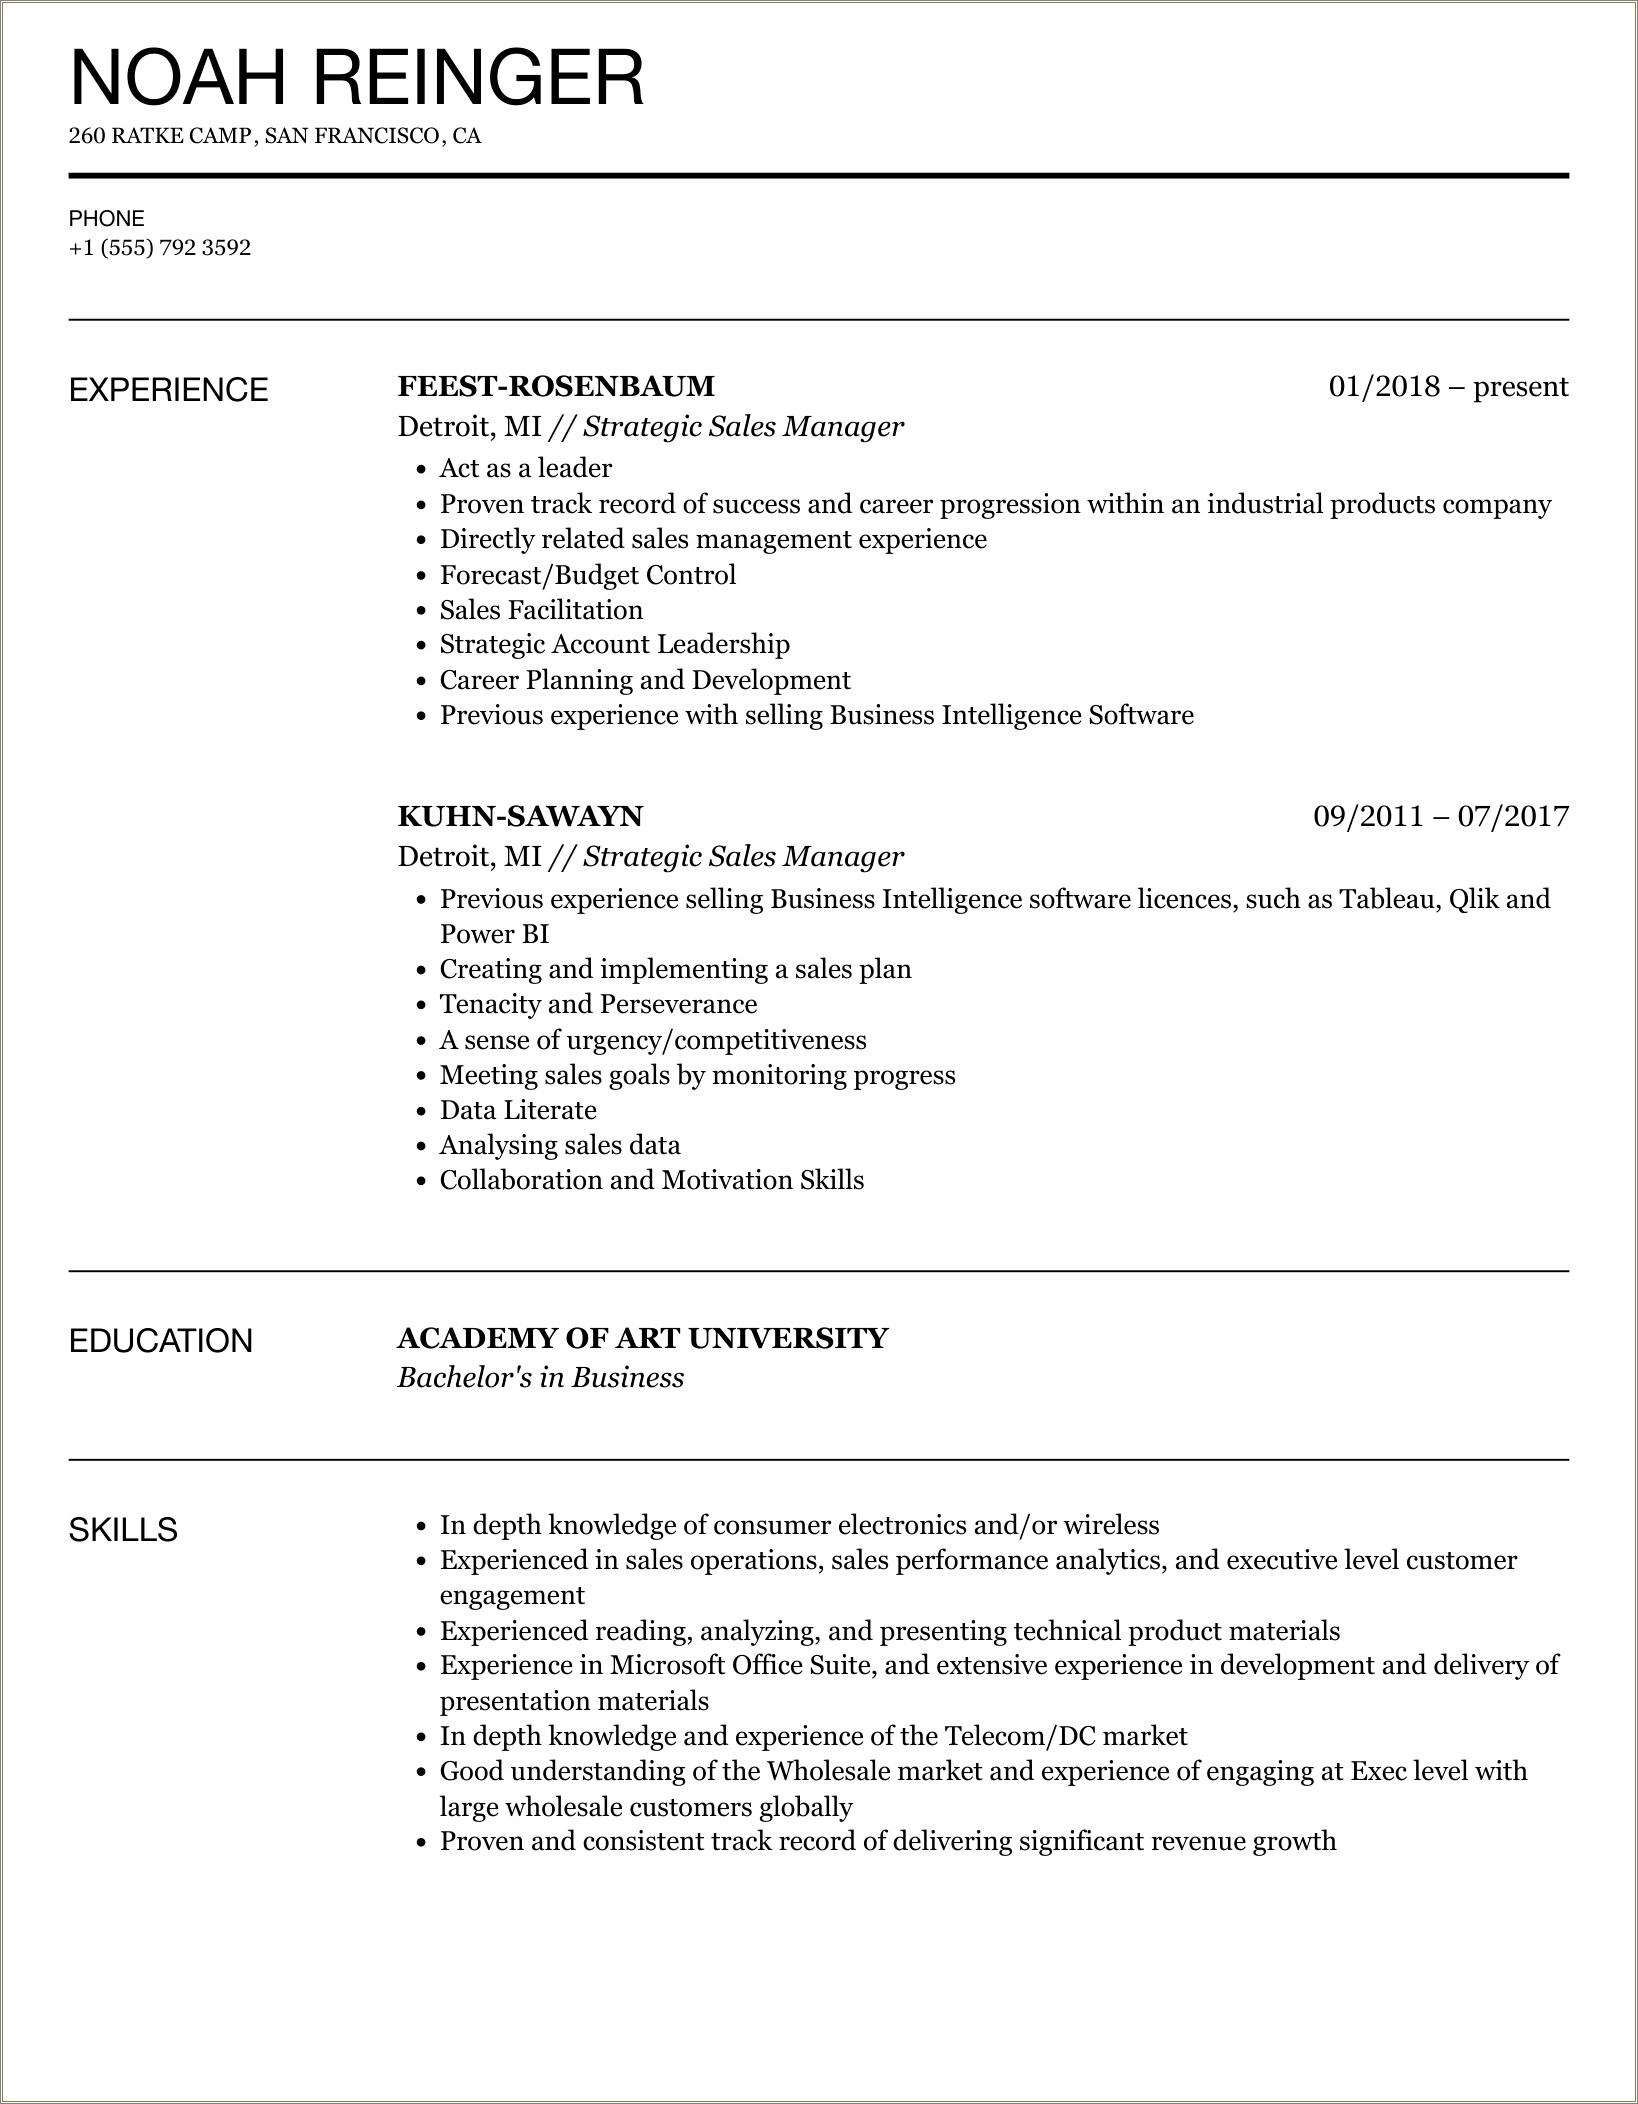 2018 Account Manager Resume Samples From Mosiac